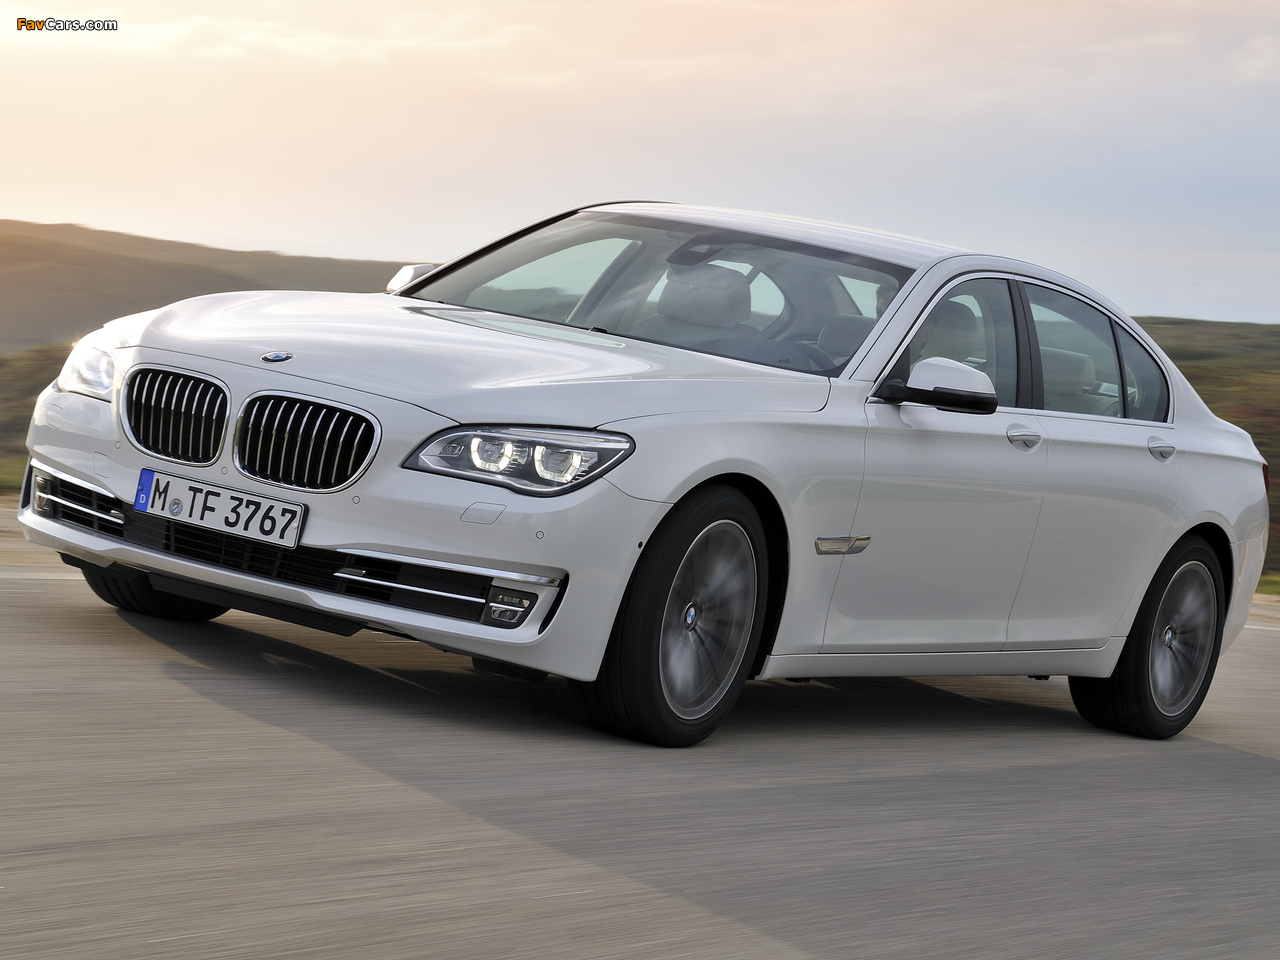 BMW 750d xDrive (F01) 2012 pictures (1280 x 960)